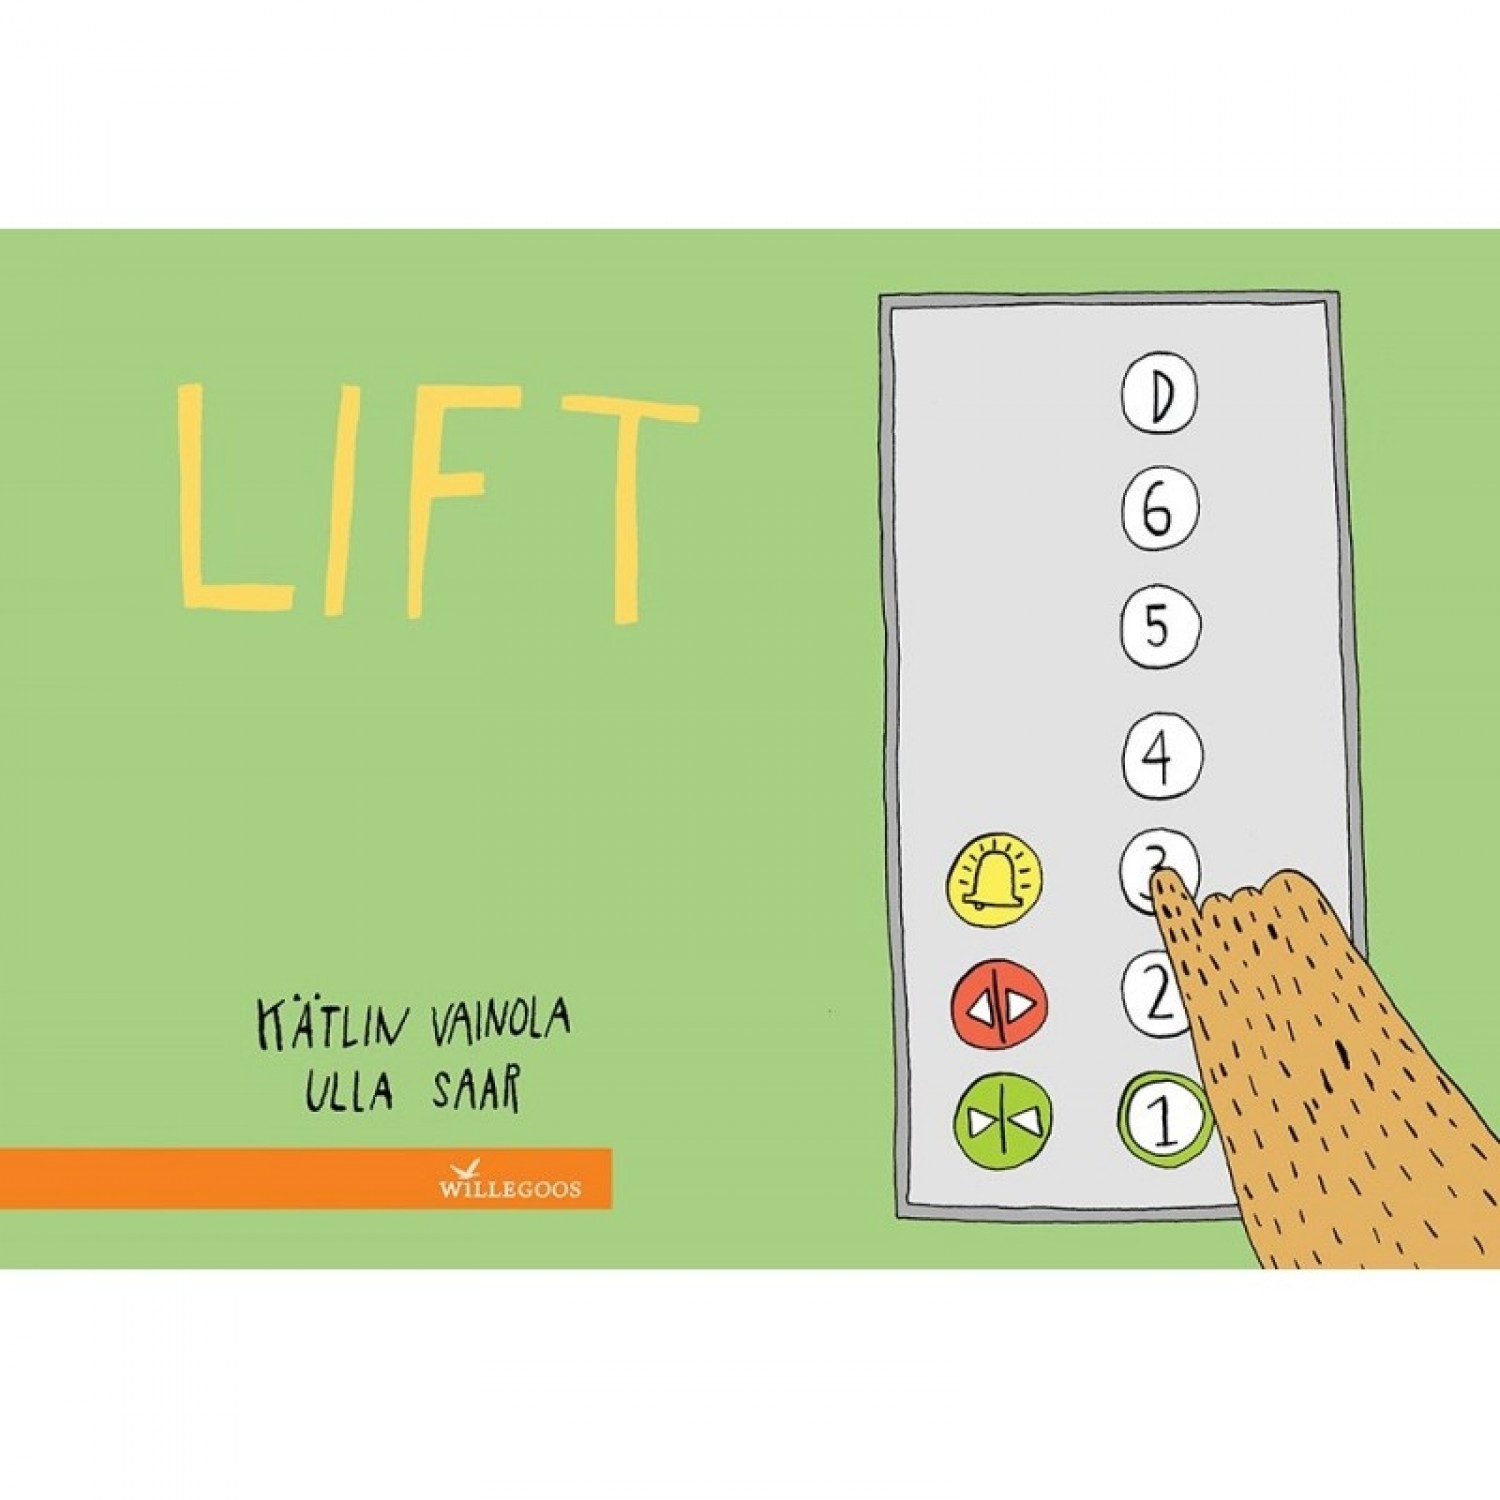 LIFT– German Eco Picture Book for toddlers | Willegoos